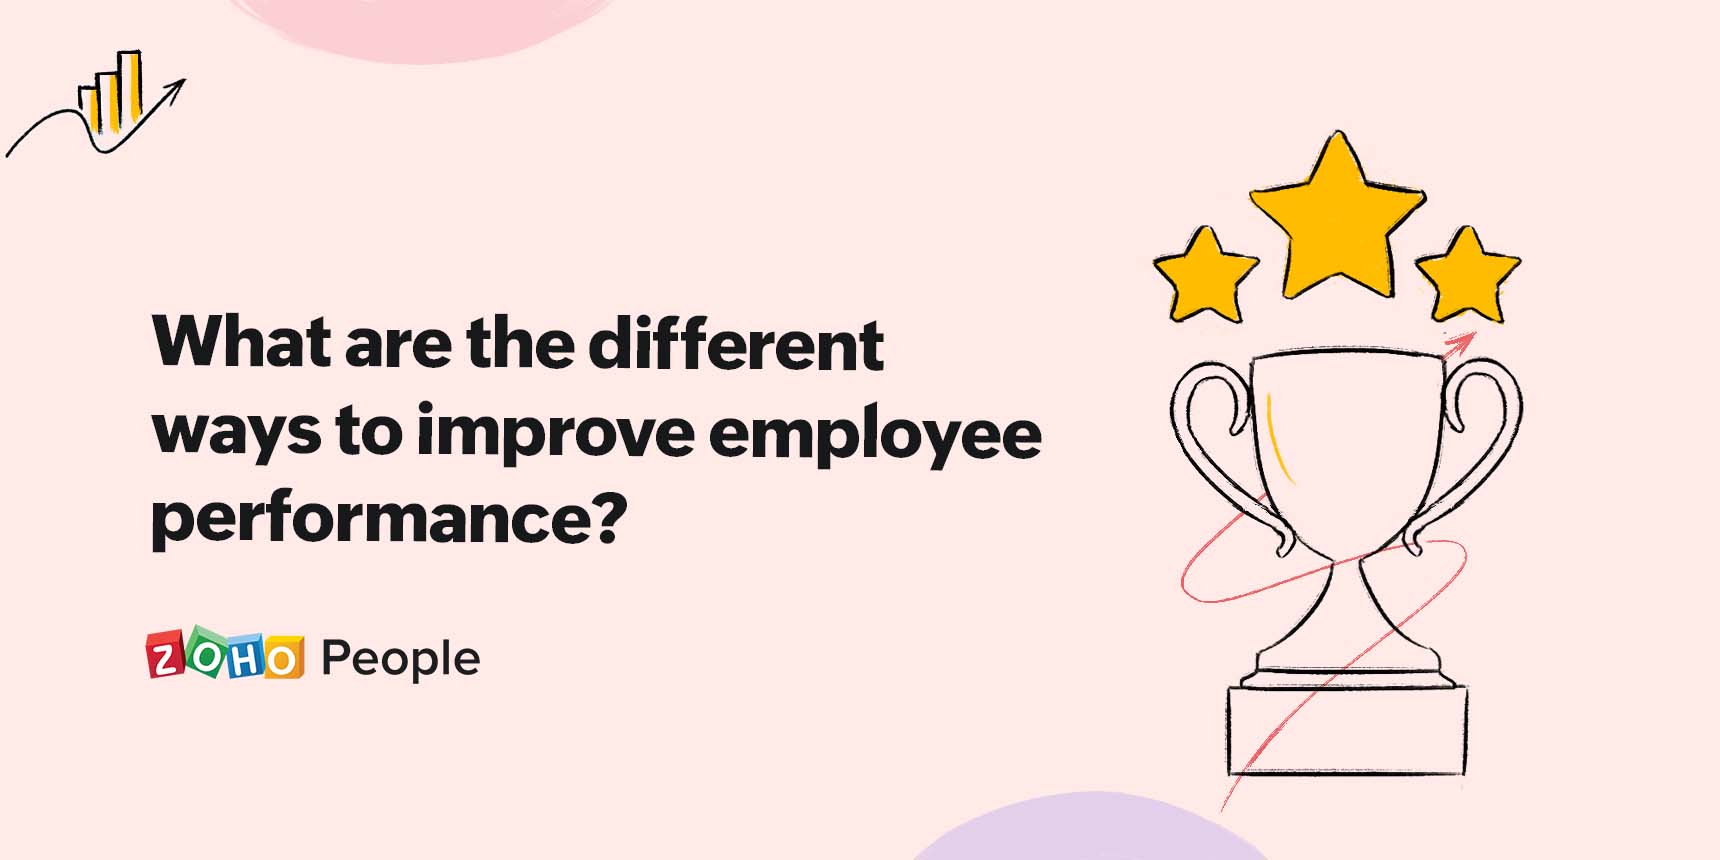 Understanding the different aspects that improve employee performance